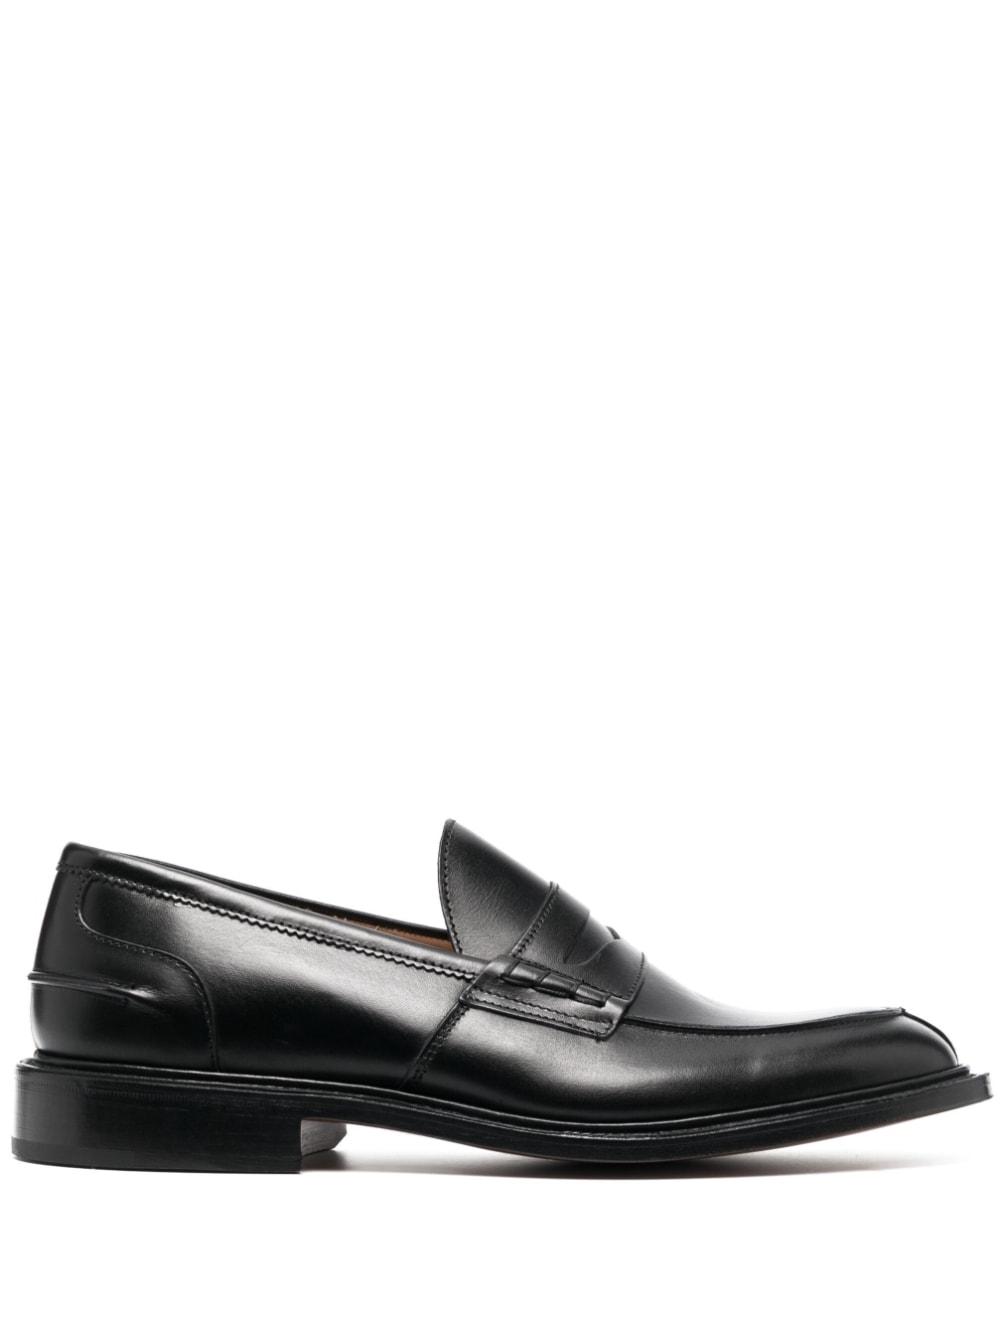 Tricker's Almond Toe Leather Loafers in Black for Men | Lyst